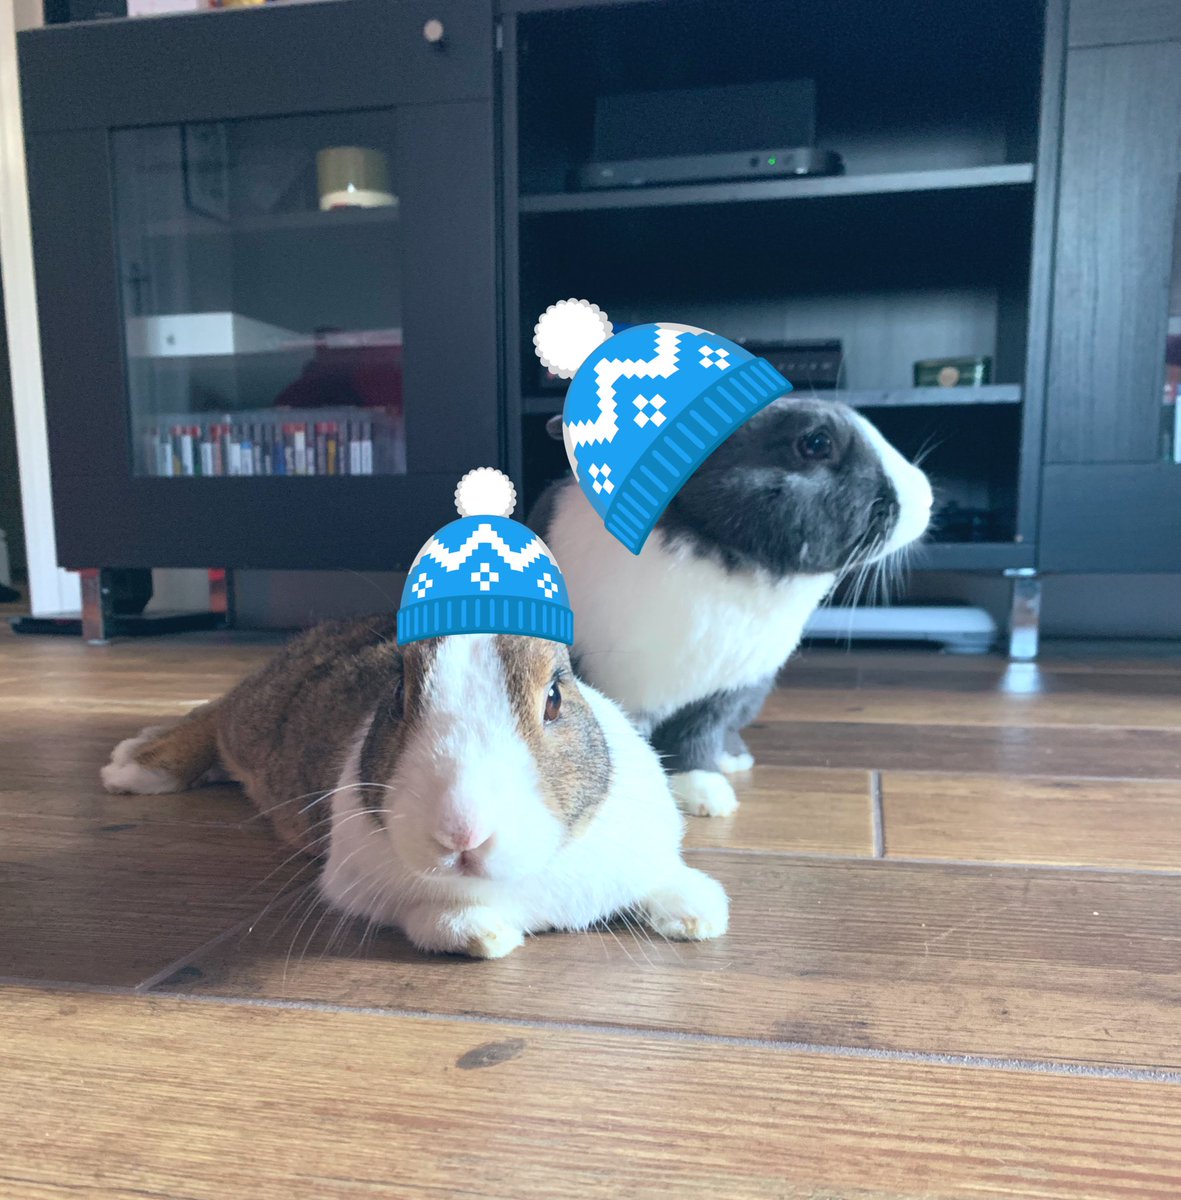 Human made a silly photo of us for Christmas 😂 hope all our bunpals and human friends had a bunderful day! #rabbits #rabbitsoftwitter #bunnies #bobblehats